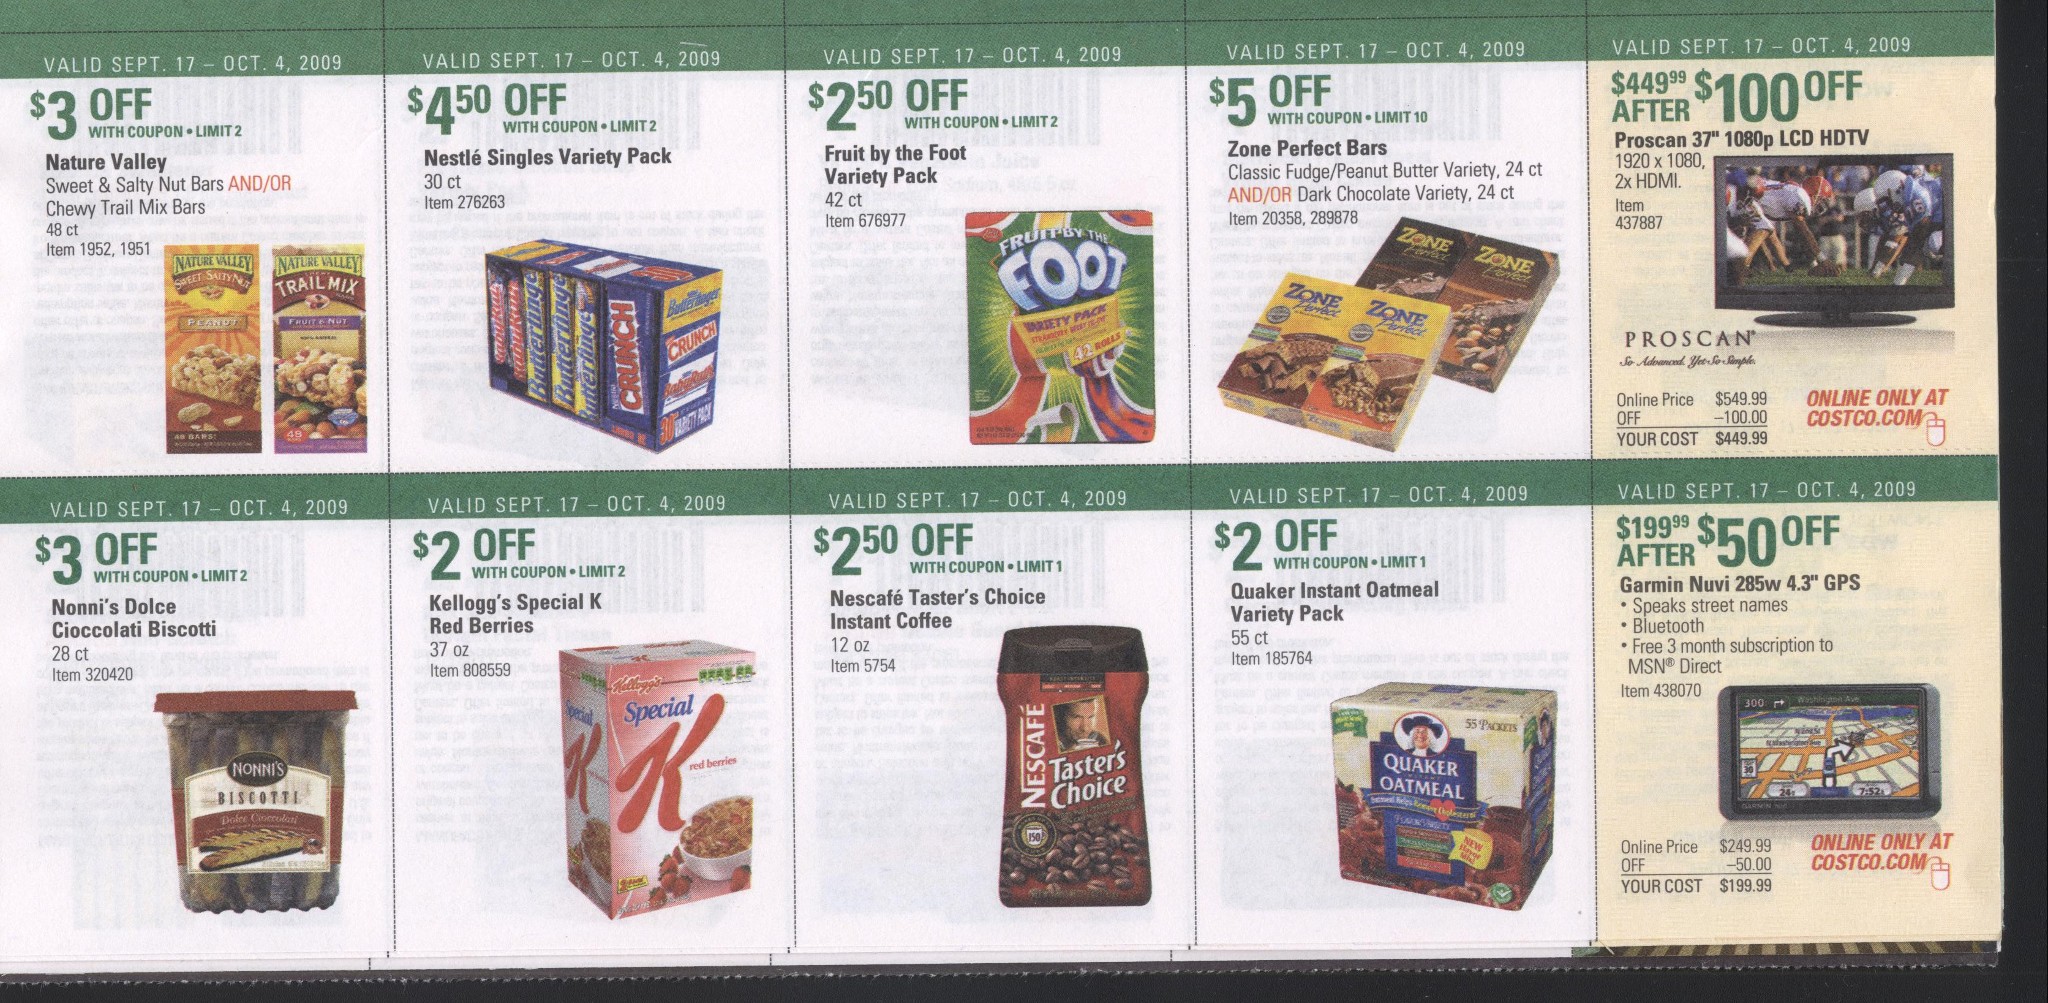 Full image coupon book page ->2<-